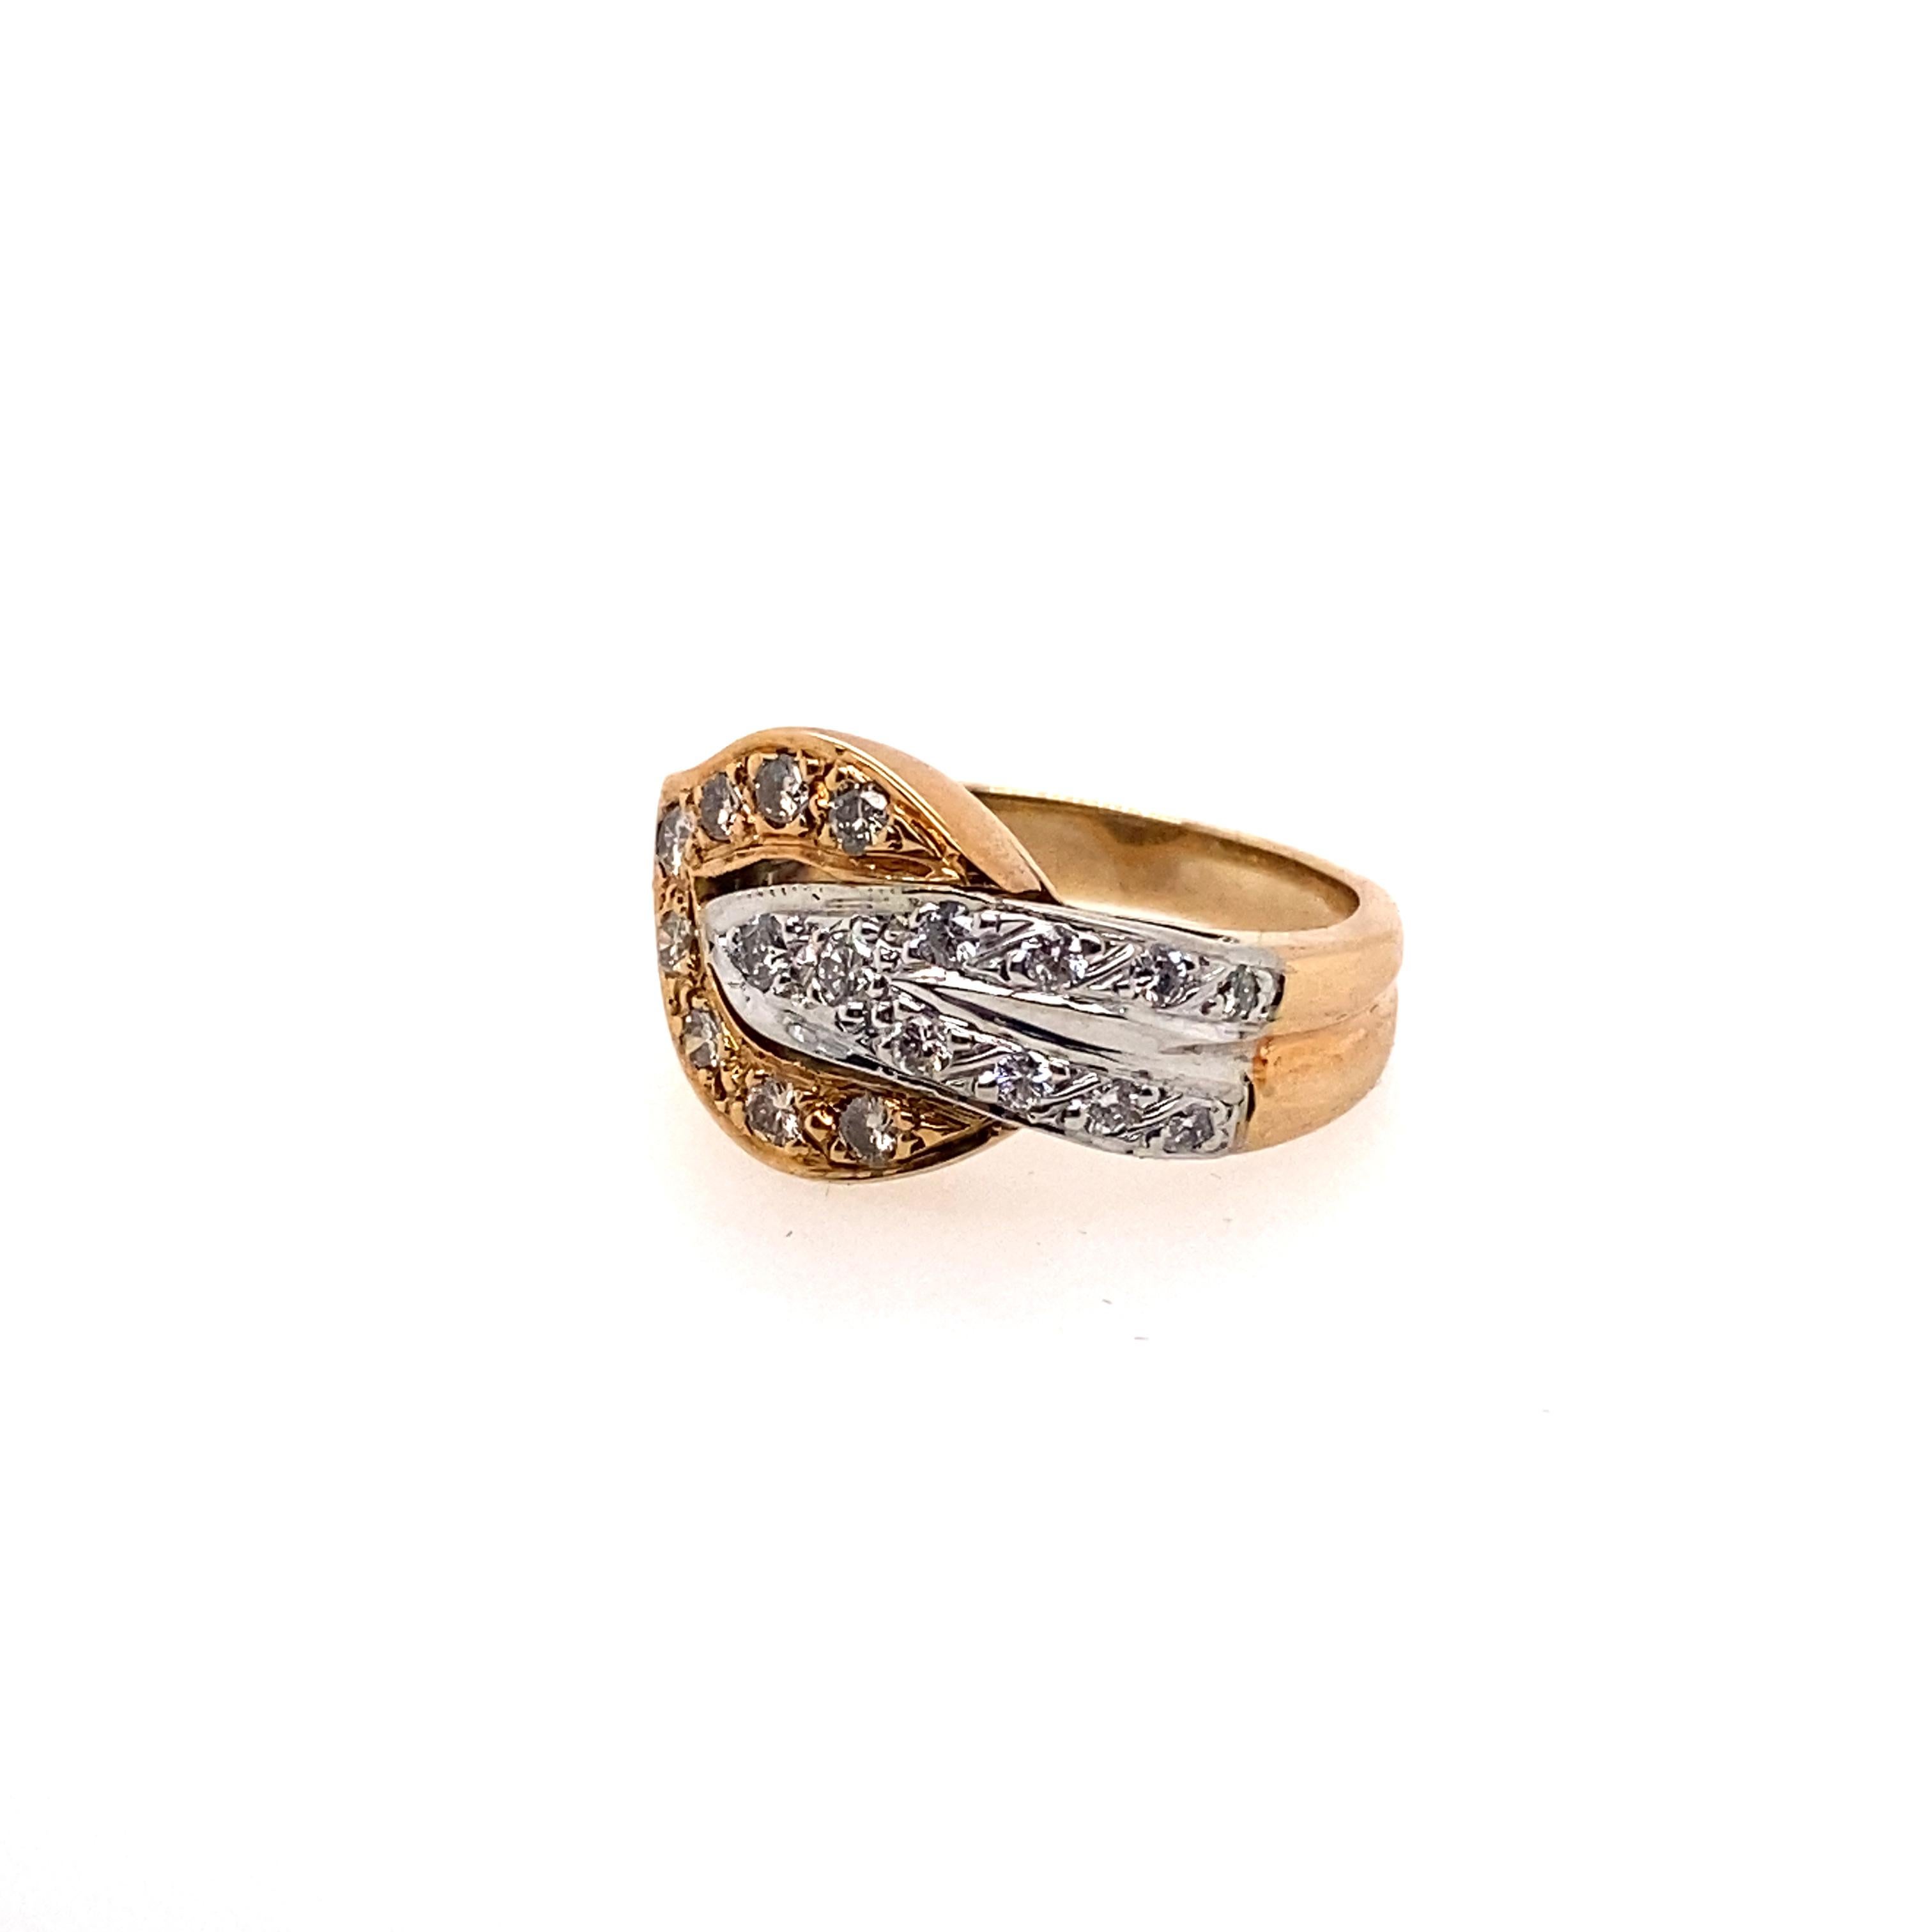 The eighteen brilliant round diamonds set in the 14K yellow gold and white gold ring featured by two tone gold design. This ring features a classic look and can be worn in everyday.

Diamonds Weight: 0.63 carat
Diamonds Shape : Brilliant